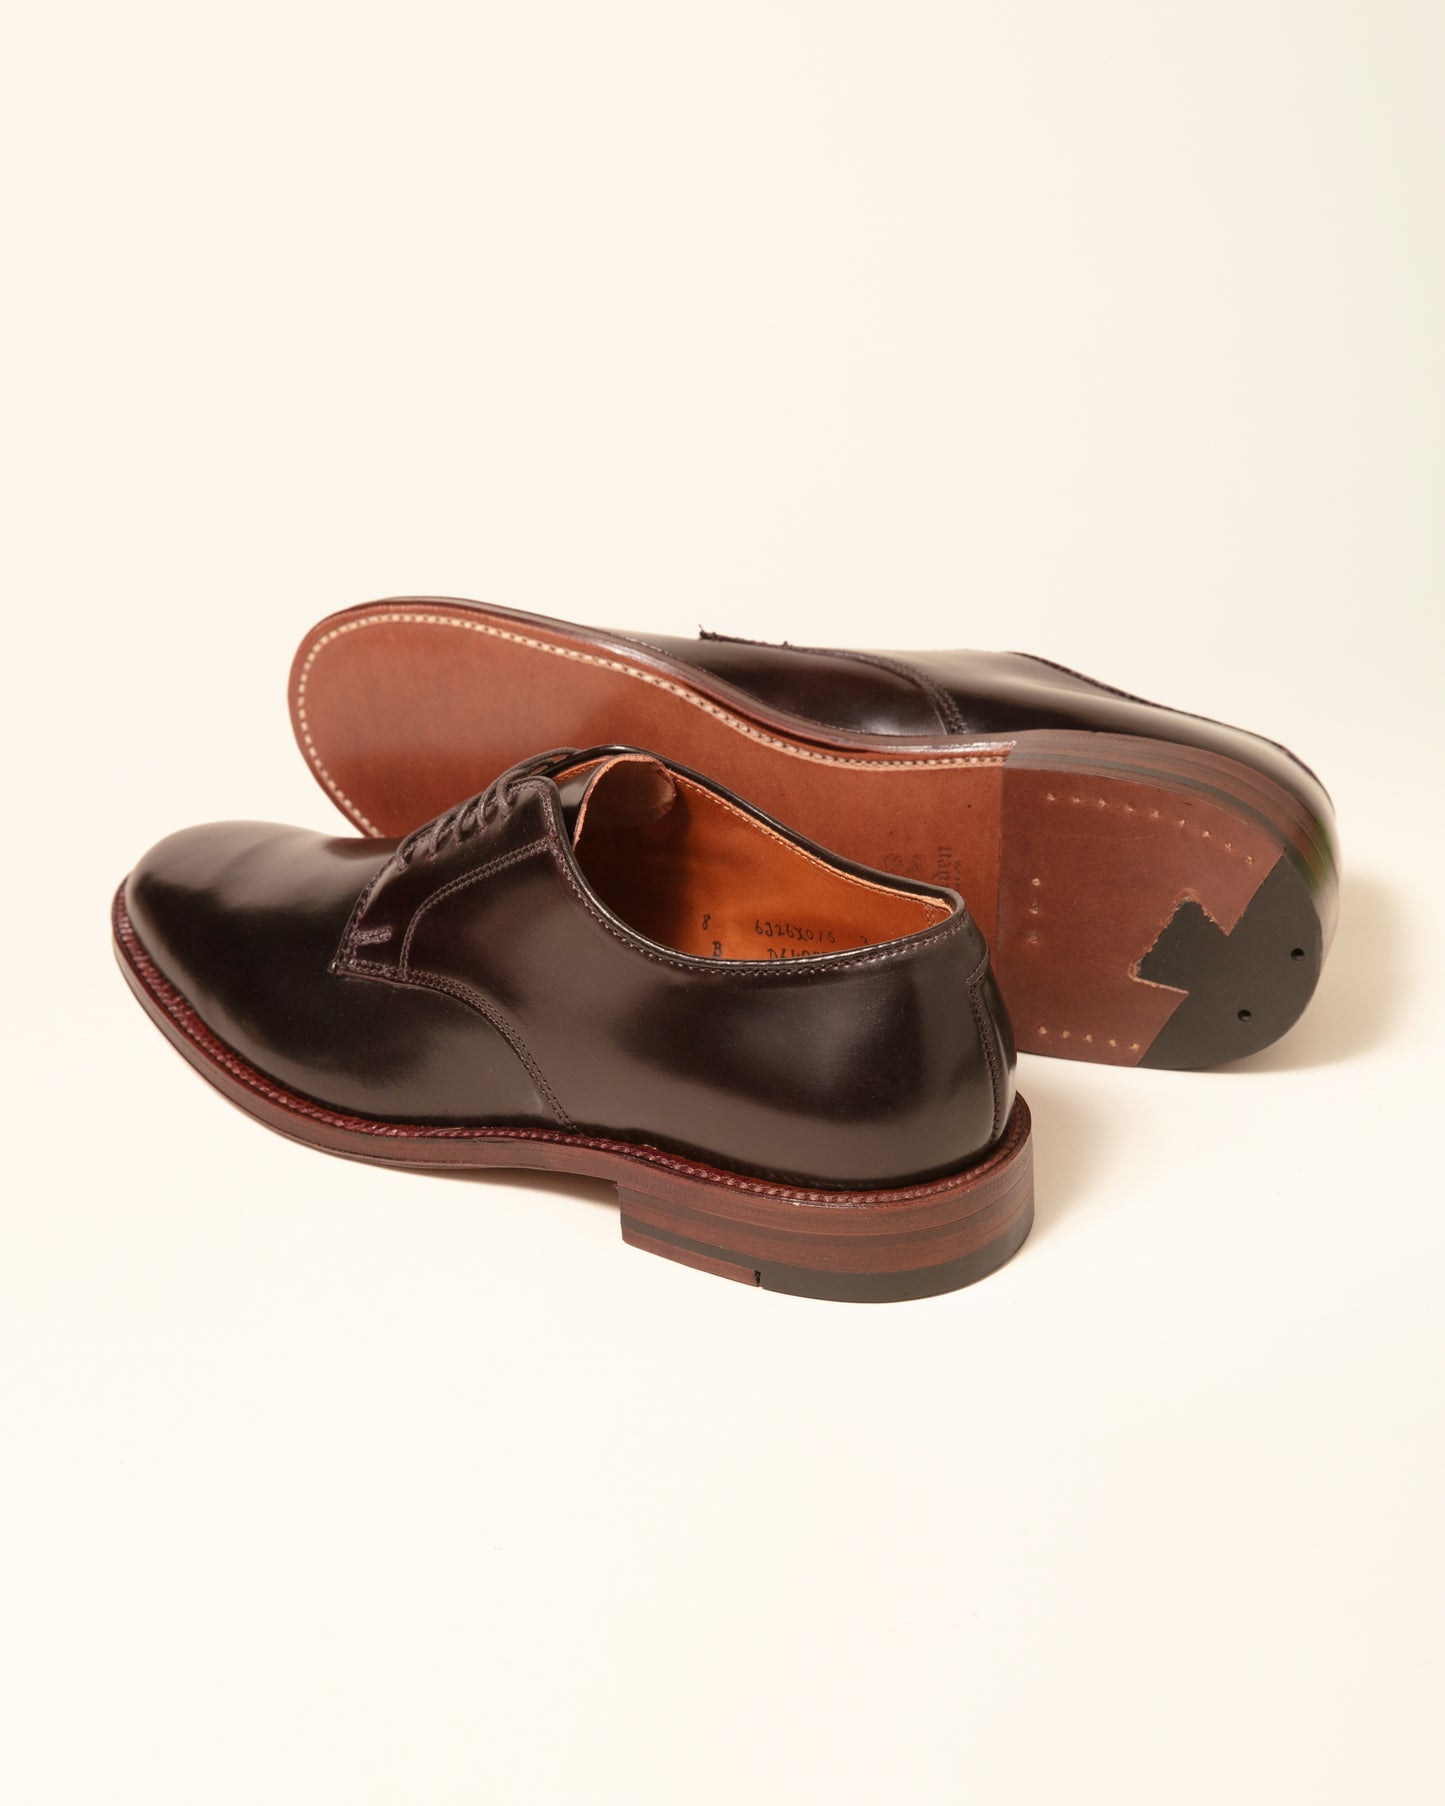 "Victory Heights" Unlined Plain Toe Dover - Color 8 Shell Cordovan